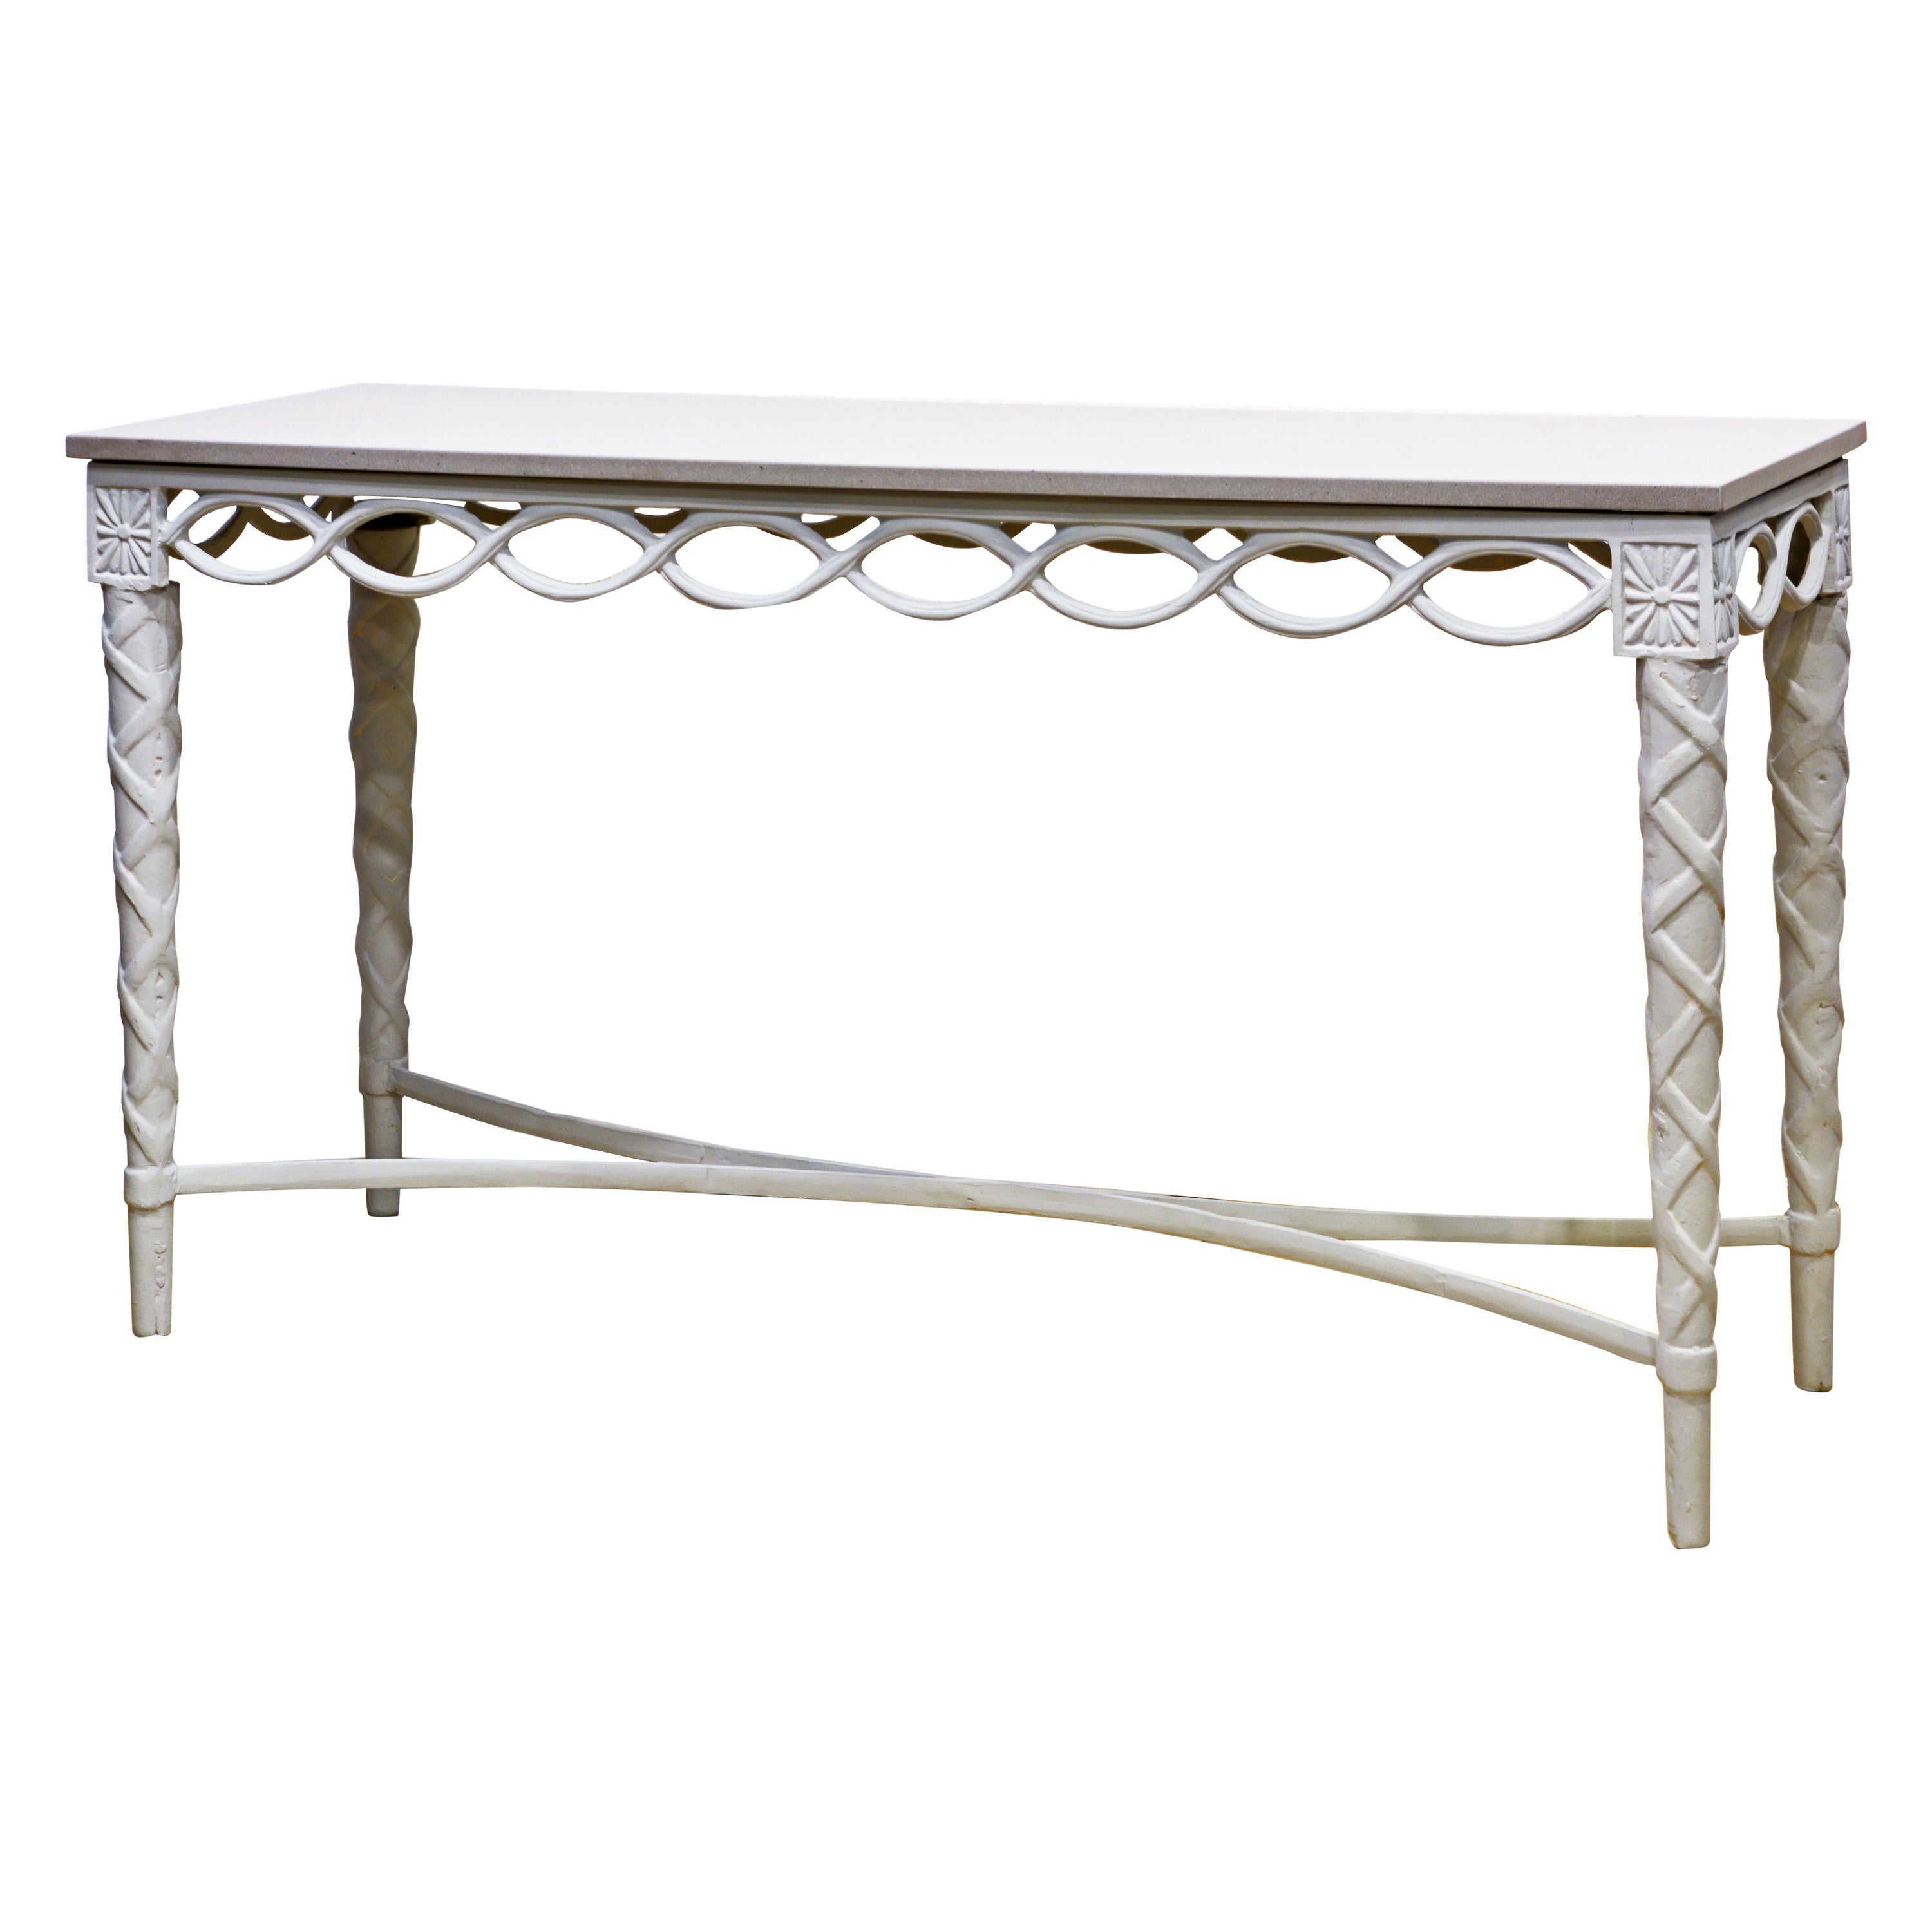 Louis XVI Style Inspired Painted Metal Gray Stone Top Console Table, 20th C. For Sale